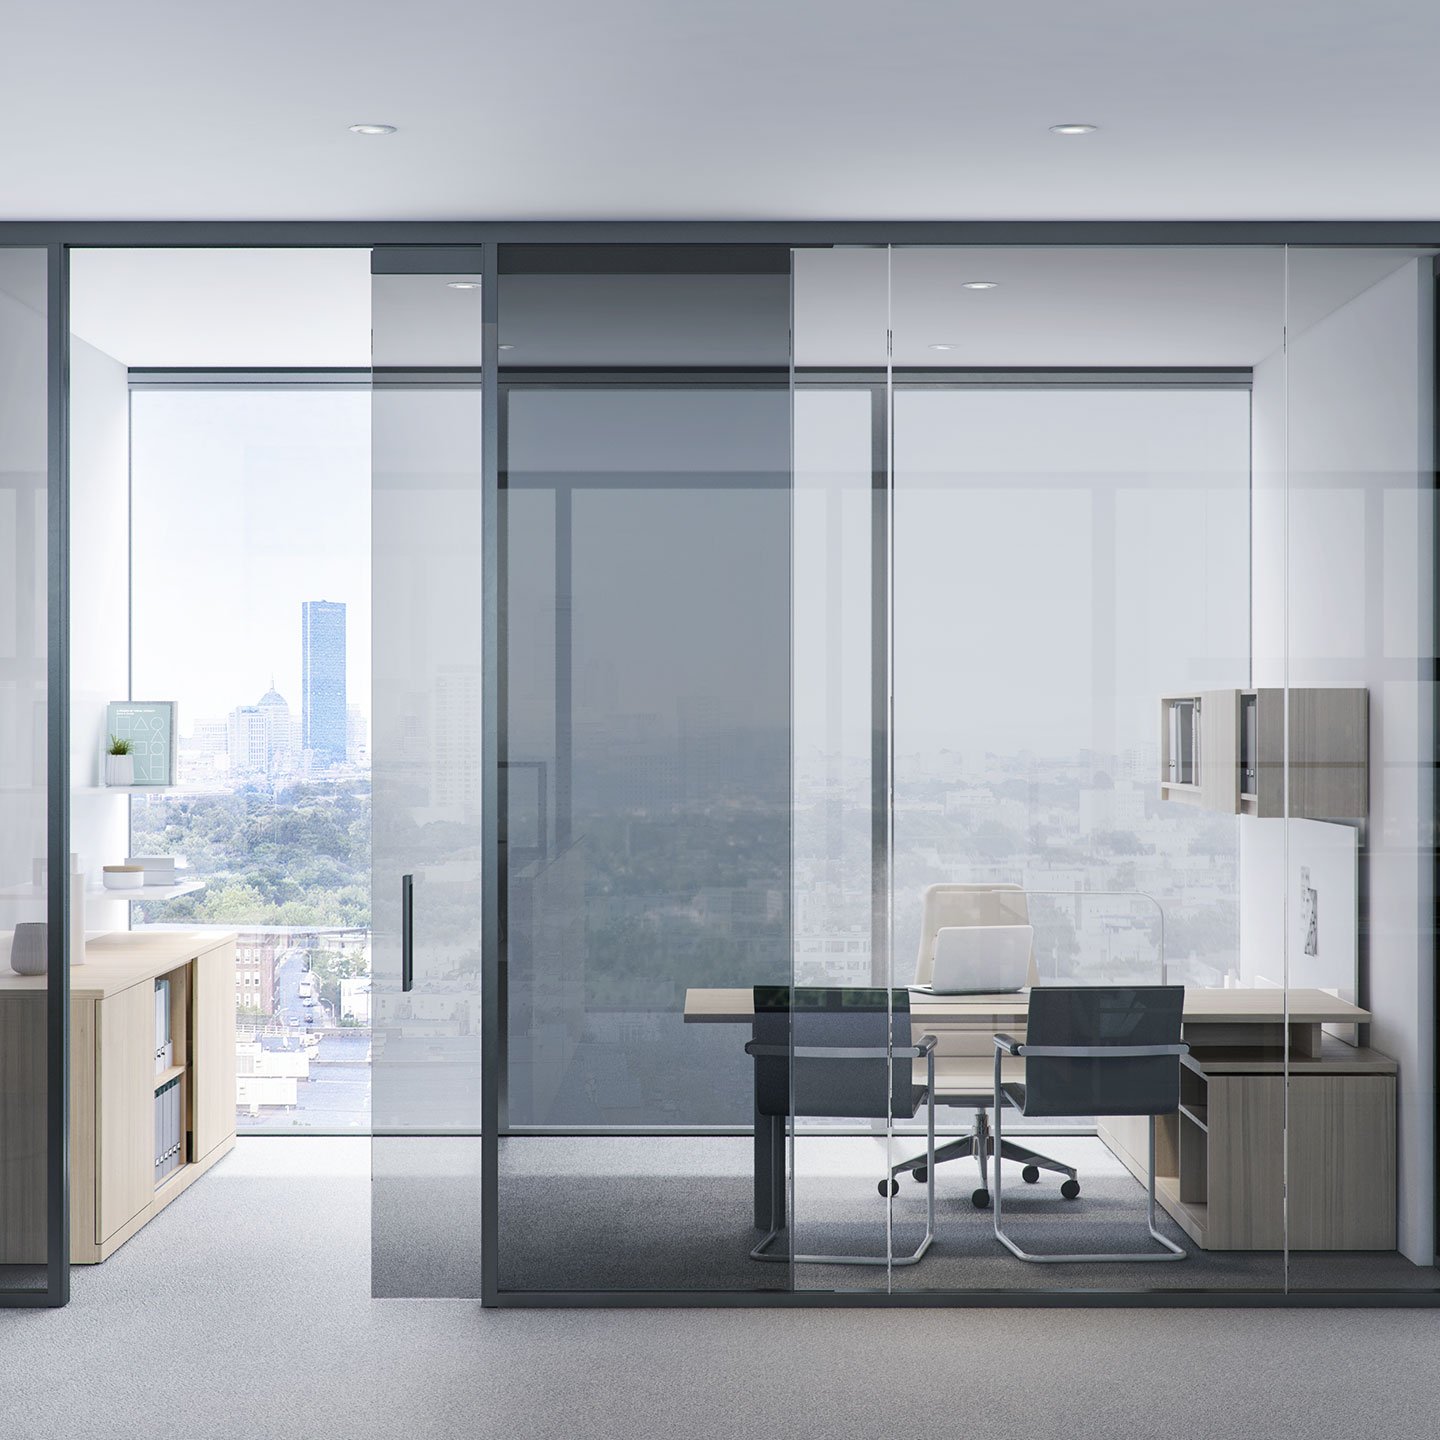 Haworth Trivati Wall for private office space with grey chairs and veneer storage and desk with window looking towards city